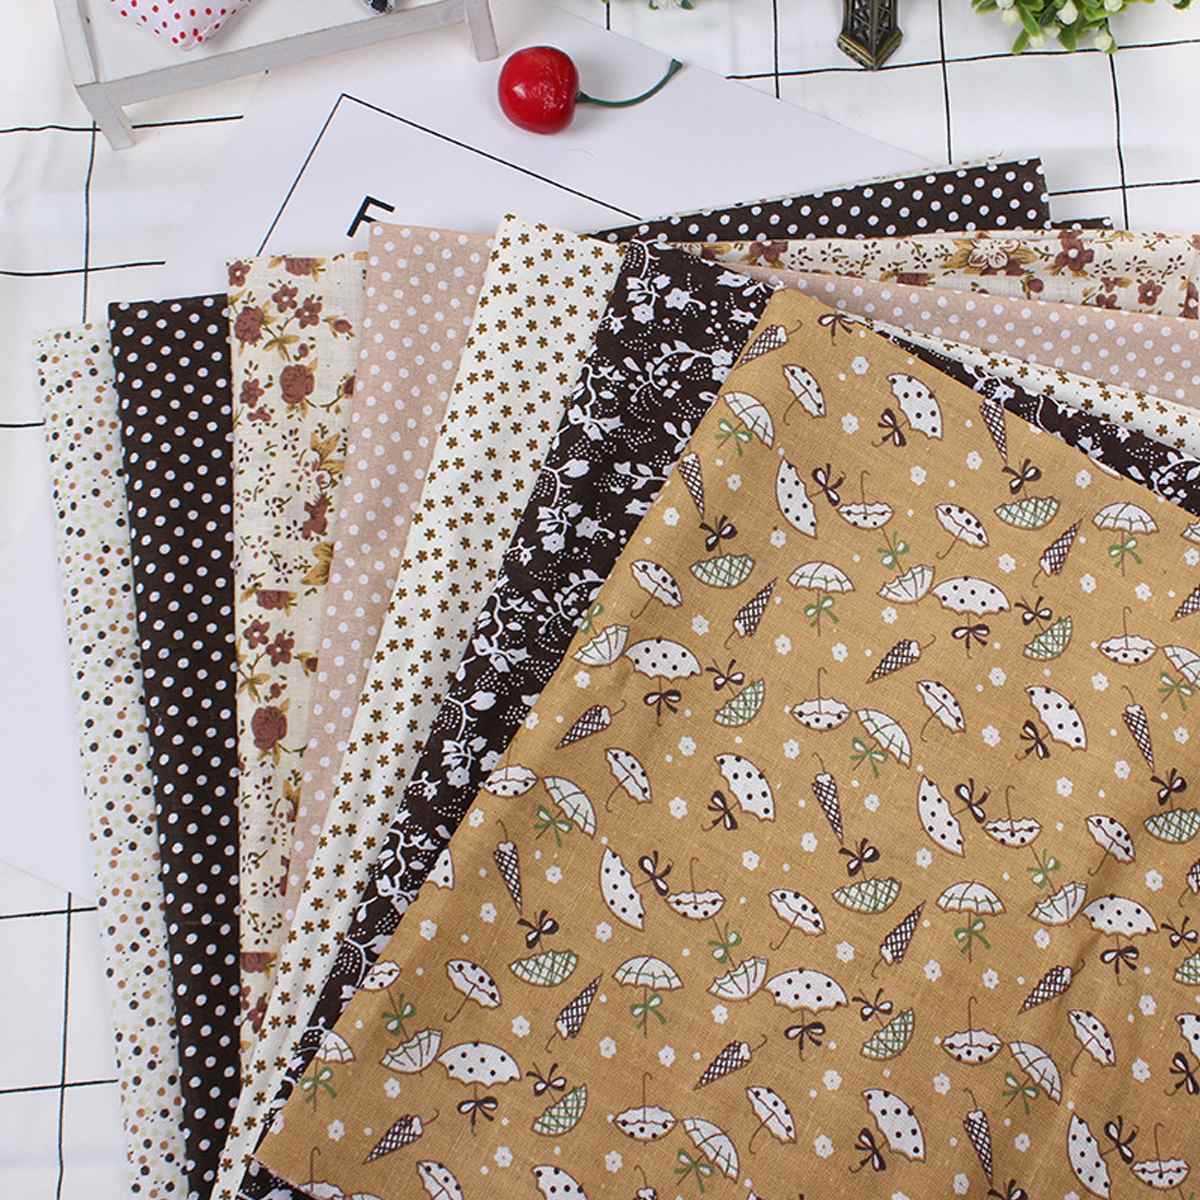 7pcs 50*50CM Square Crafts Cloth 100% Cotton Fabric Print Cloth Sewing Quilting for Patchwork Needlework DIY Handmade Material